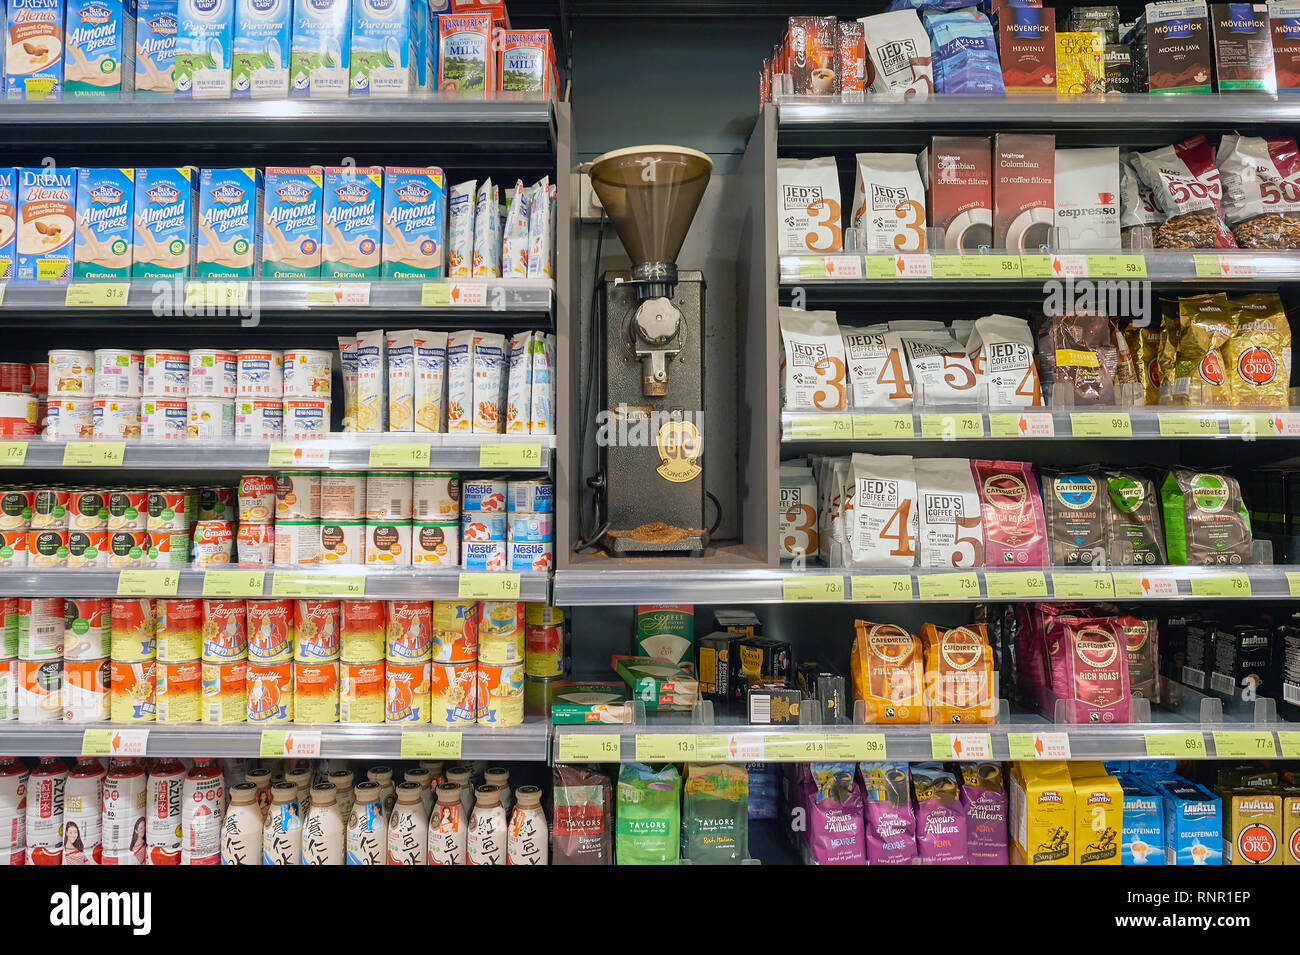 MACAO, CHINA - FEBRUARY 17, 2016: inside of a food store in Macao. Macao is an autonomous territory on the western side of the Pearl River Delta, Chin Stock Photo